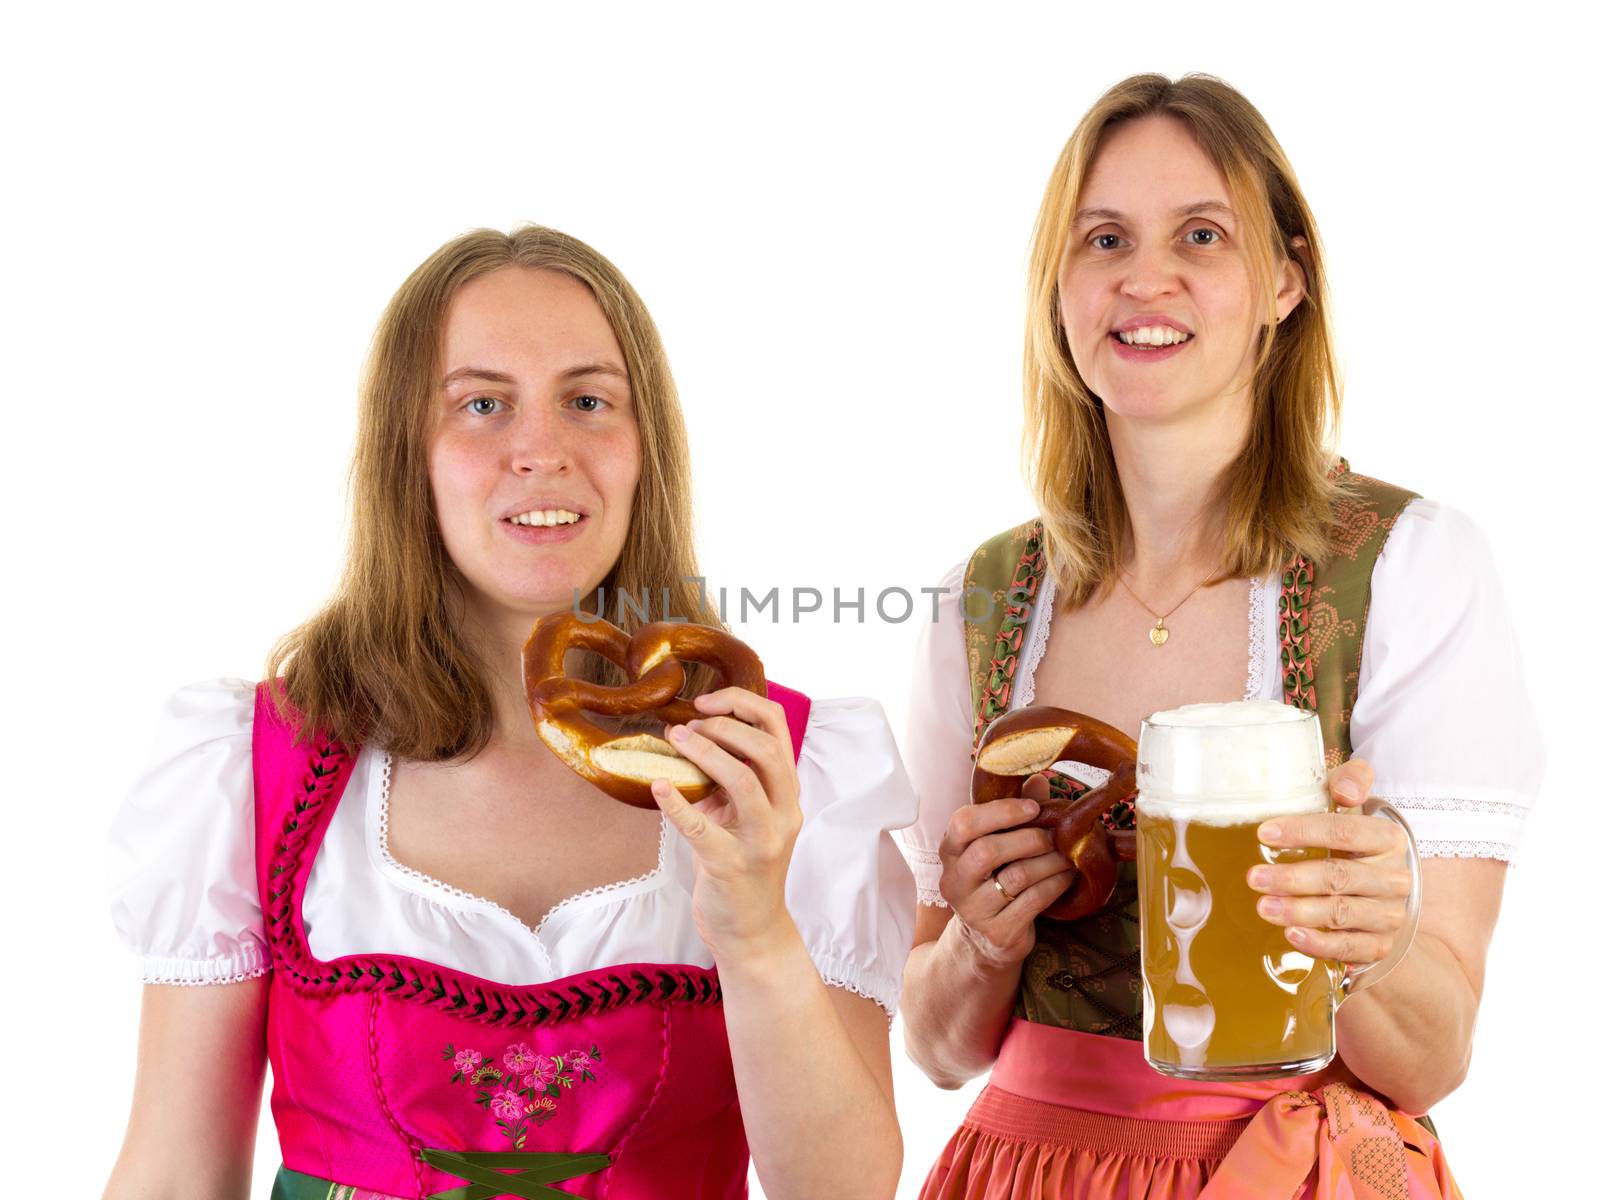 Eating pretzel and drinking beer at oktoberfest by gwolters